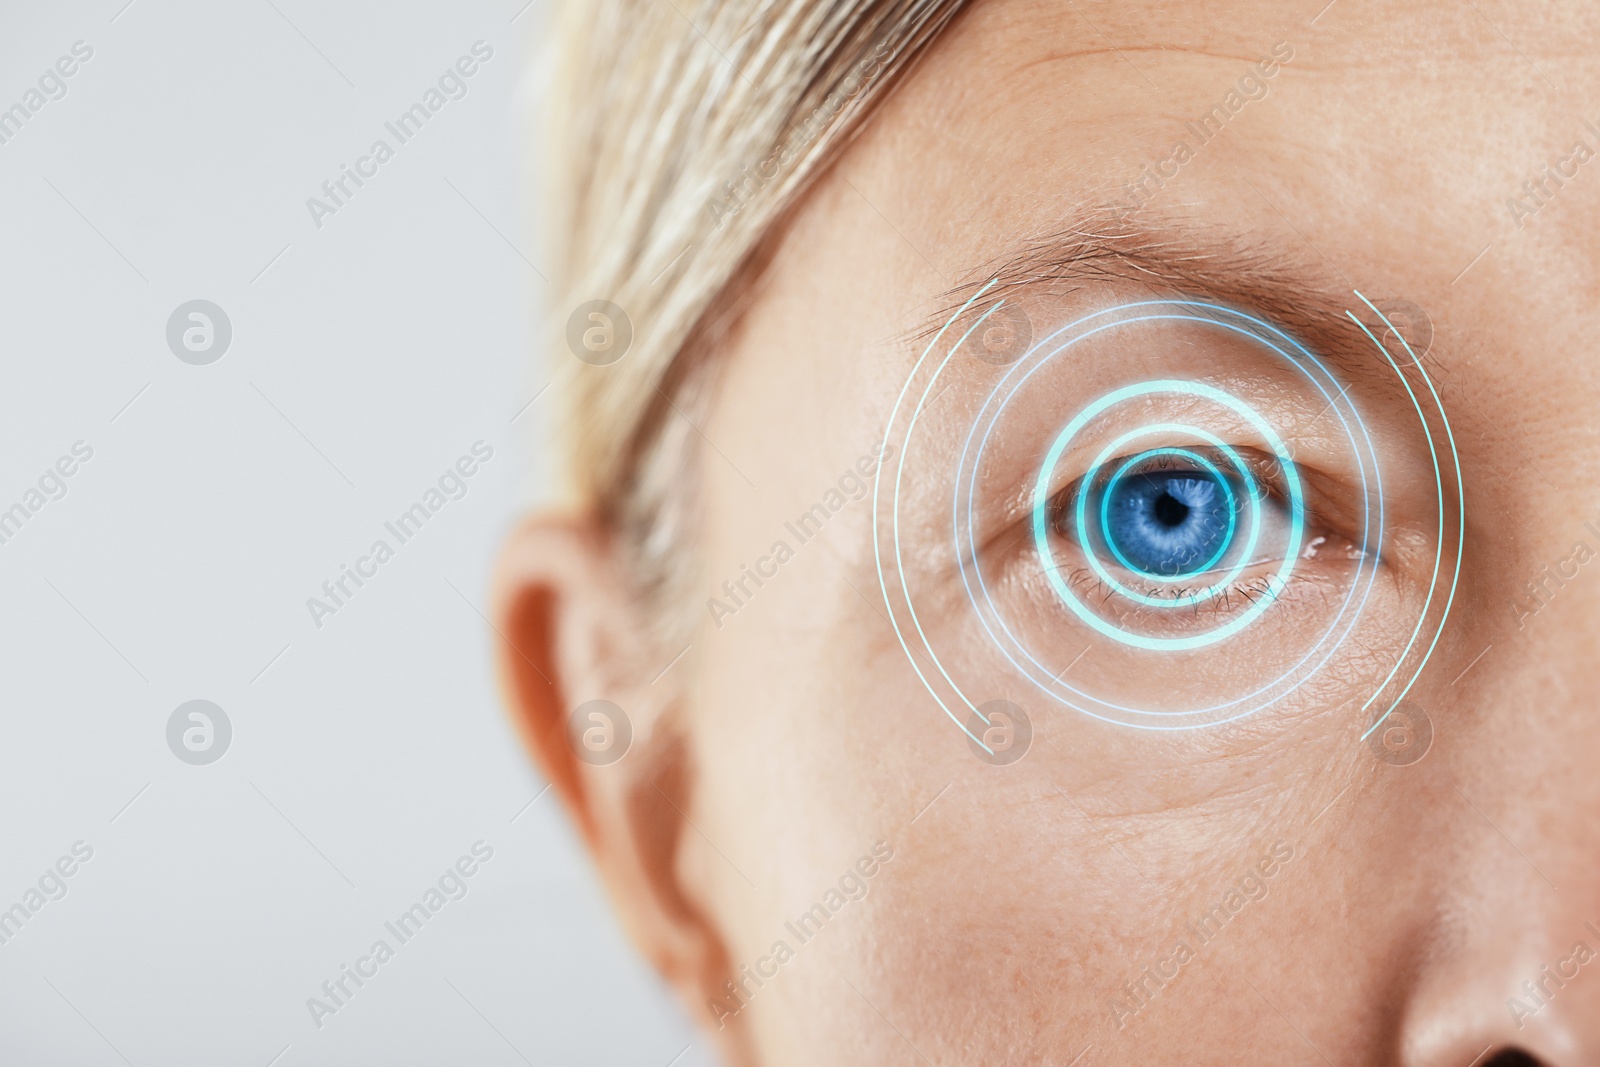 Image of Vision test. Mature woman and digital scheme focused on her eye against white background, closeup